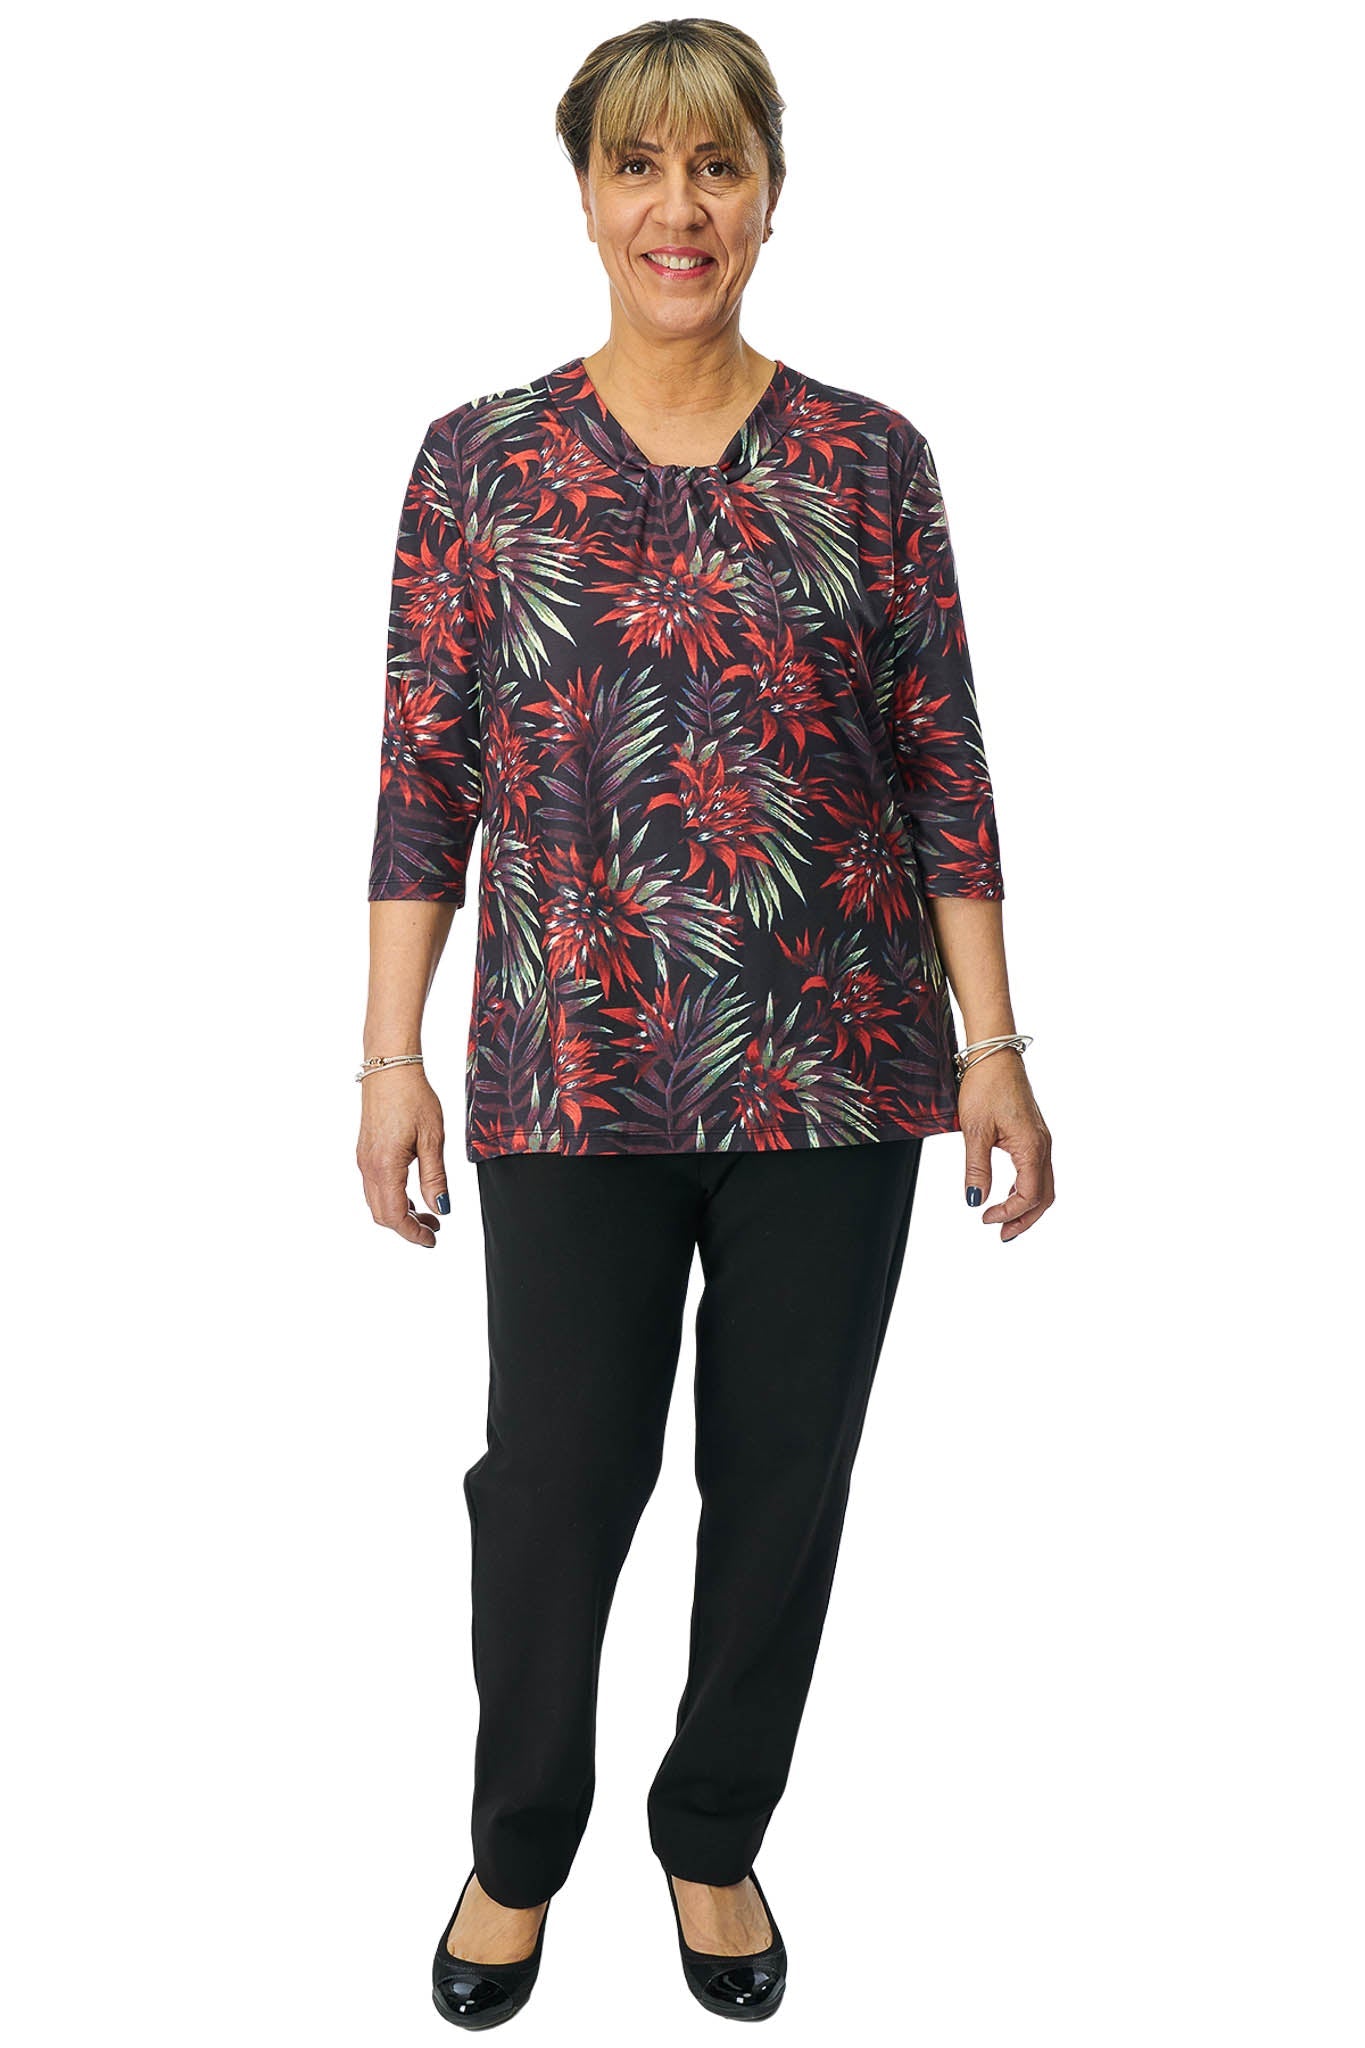 Chic Adaptive Top for Women | Art in Aging